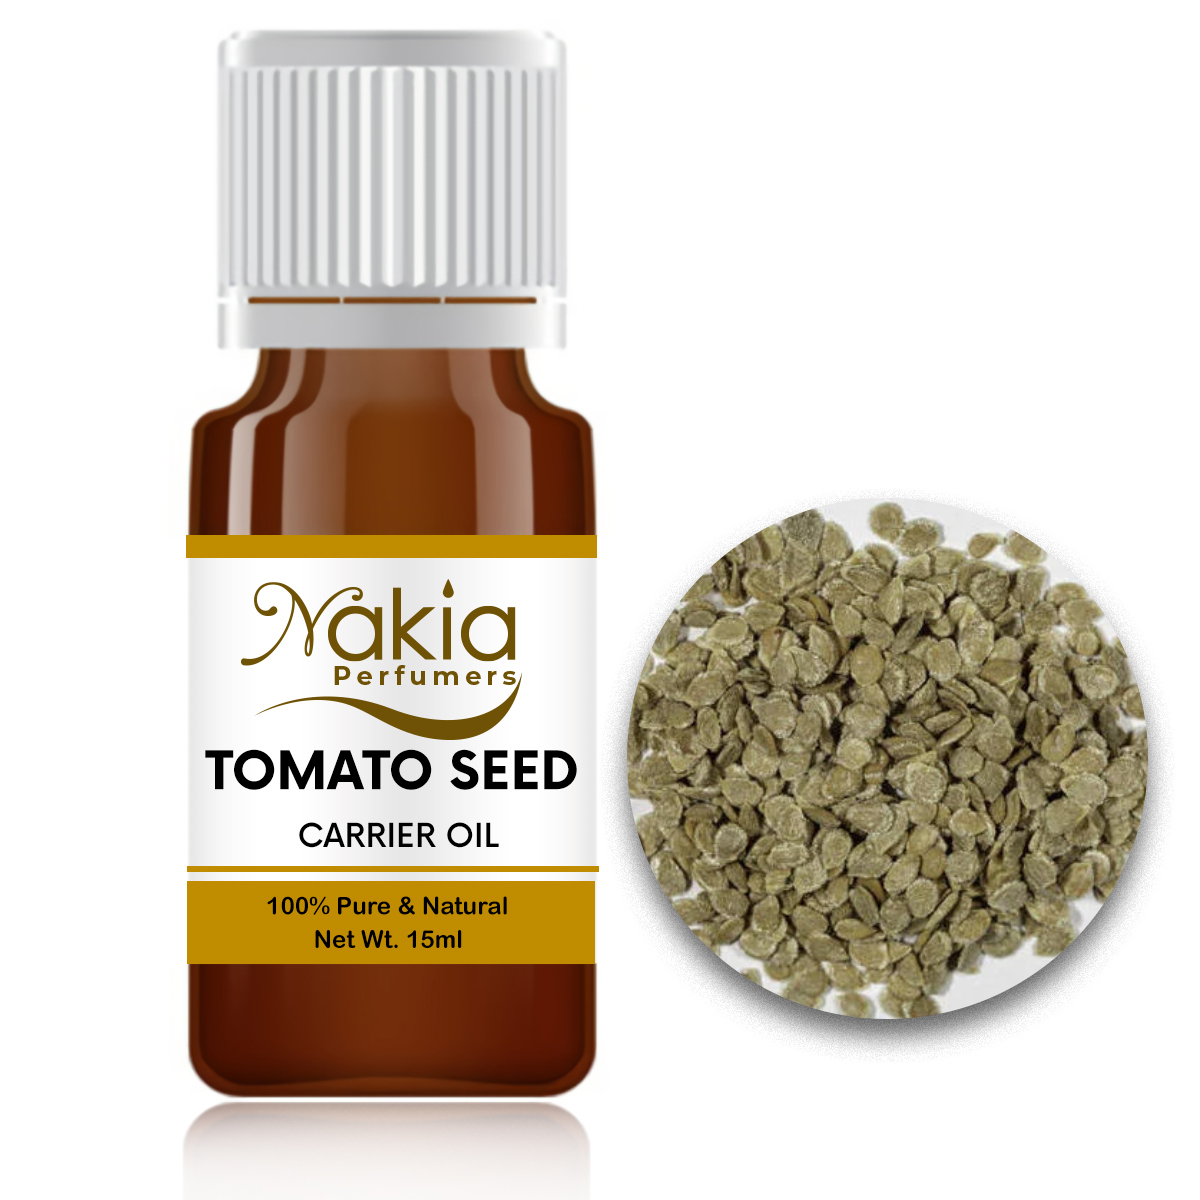 TOMATO-SEED CARRIER OIL